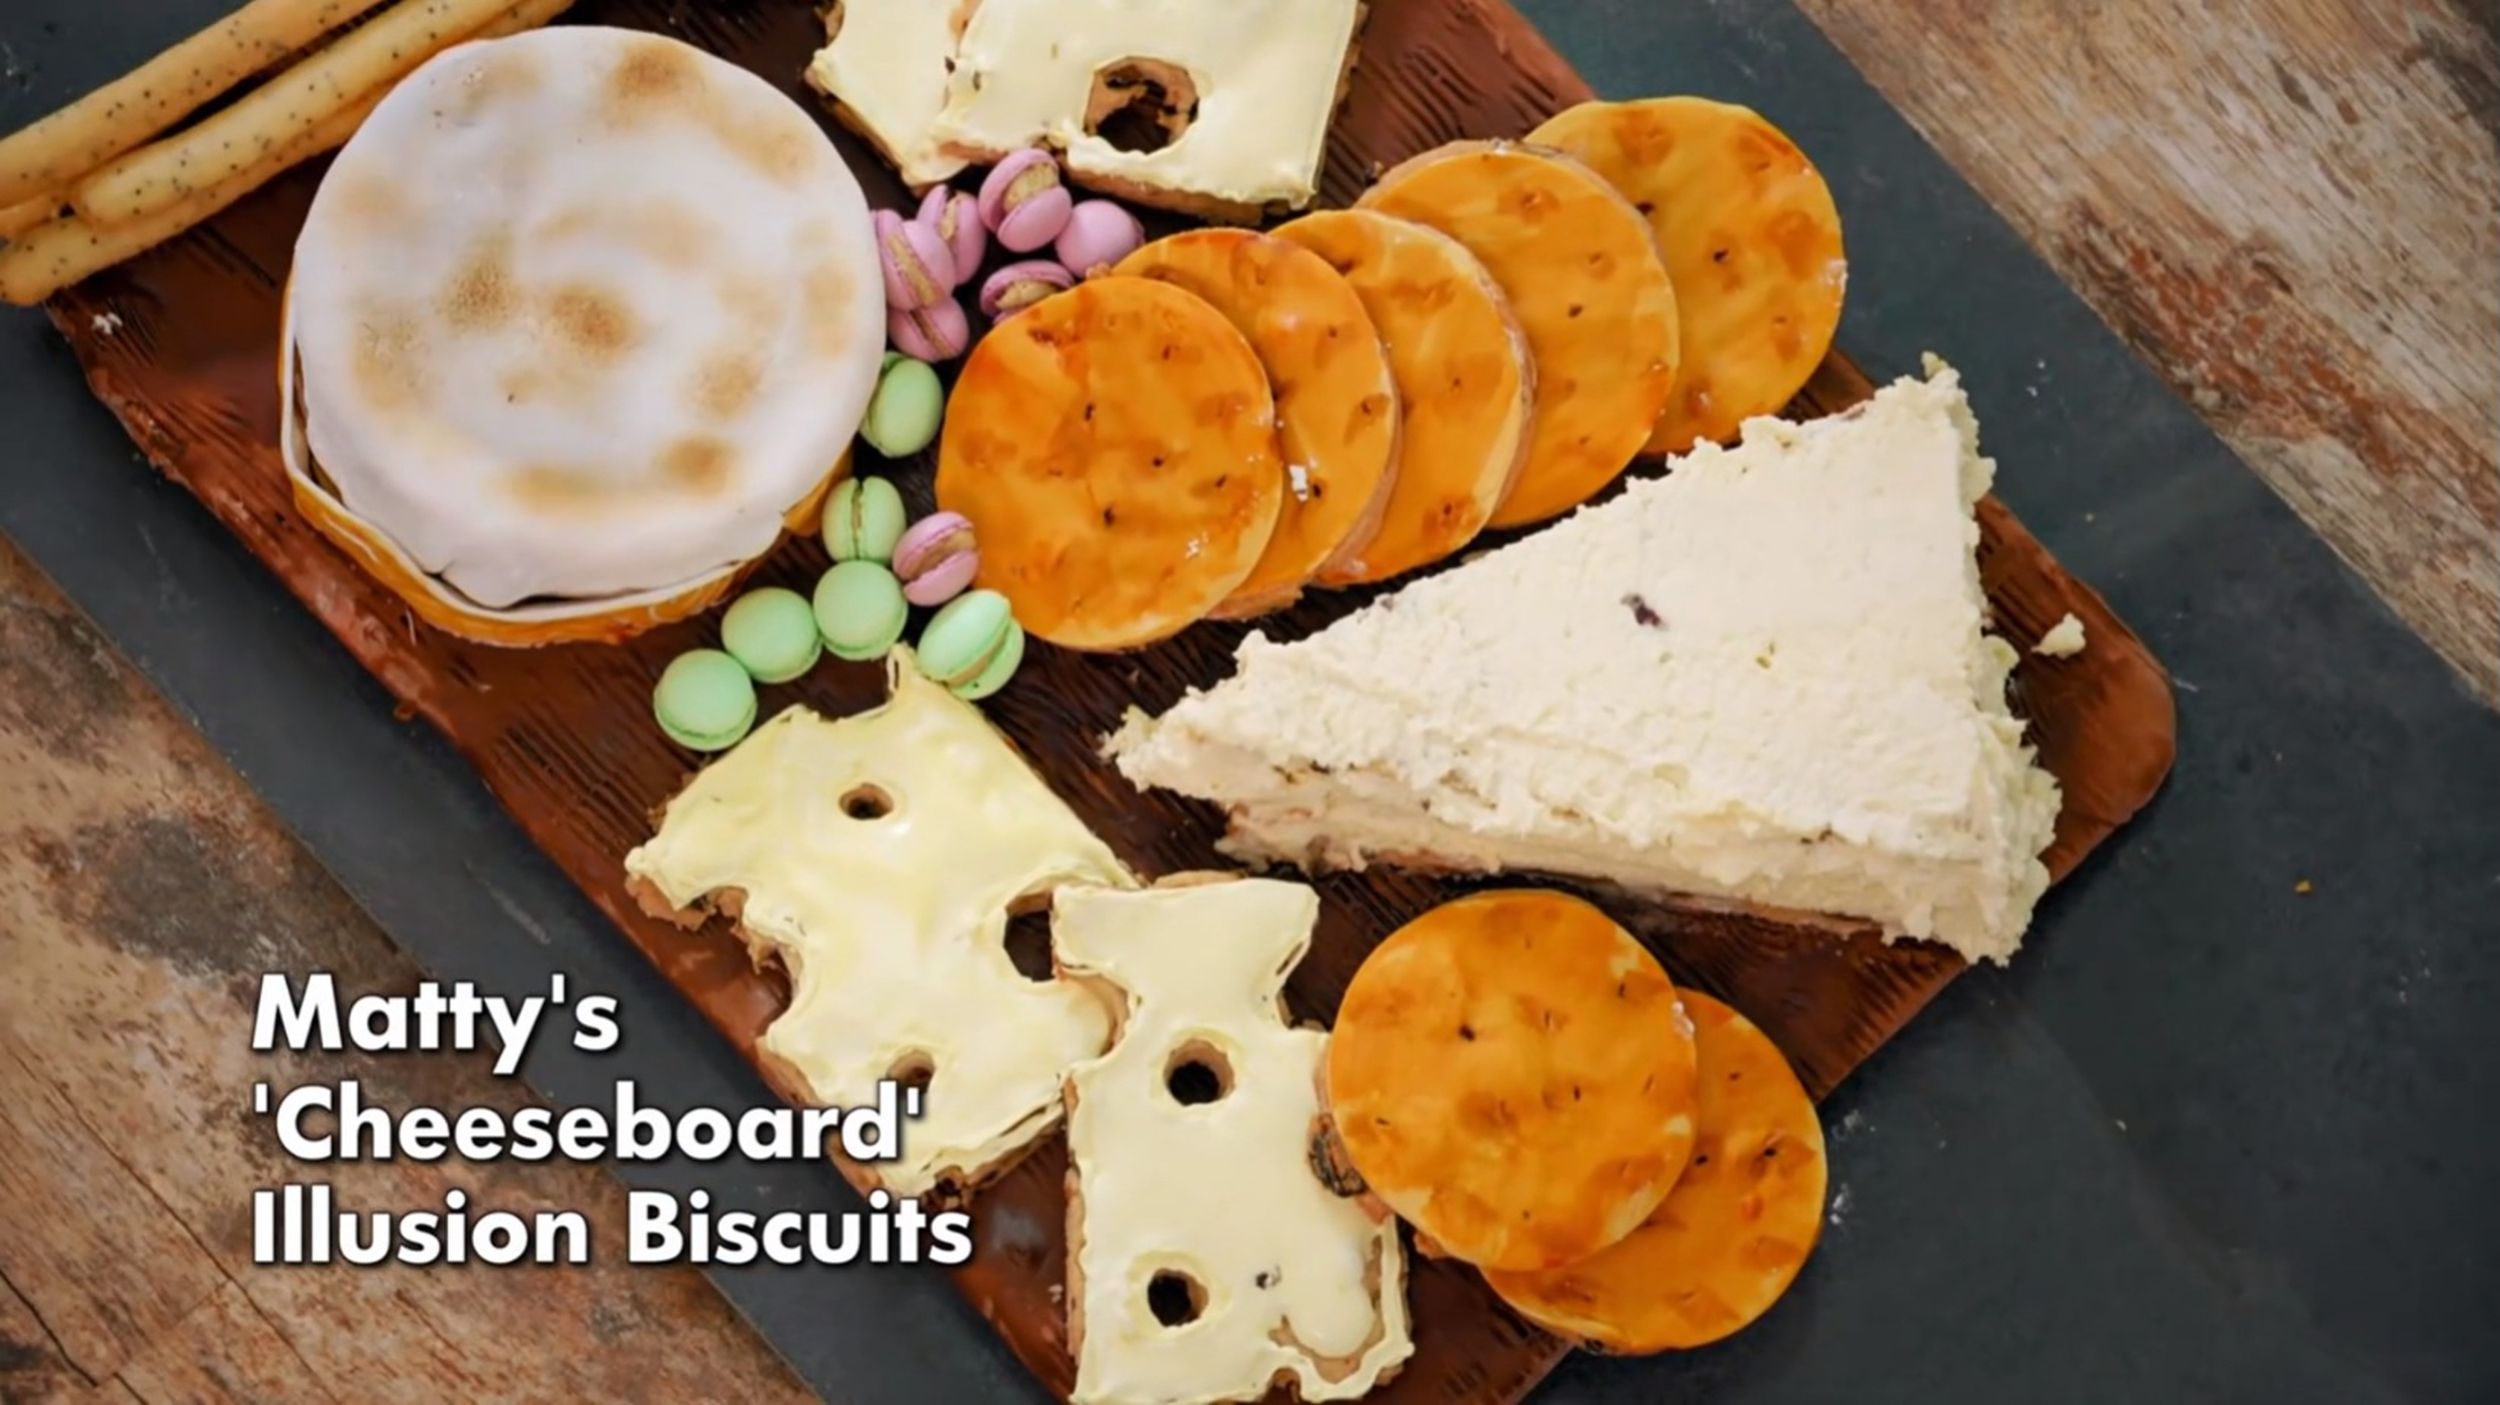 Matty’s Cheeseboard Showstopper Illusion Biscuits for The Great British Baking Show Season 14's Biscuit Week